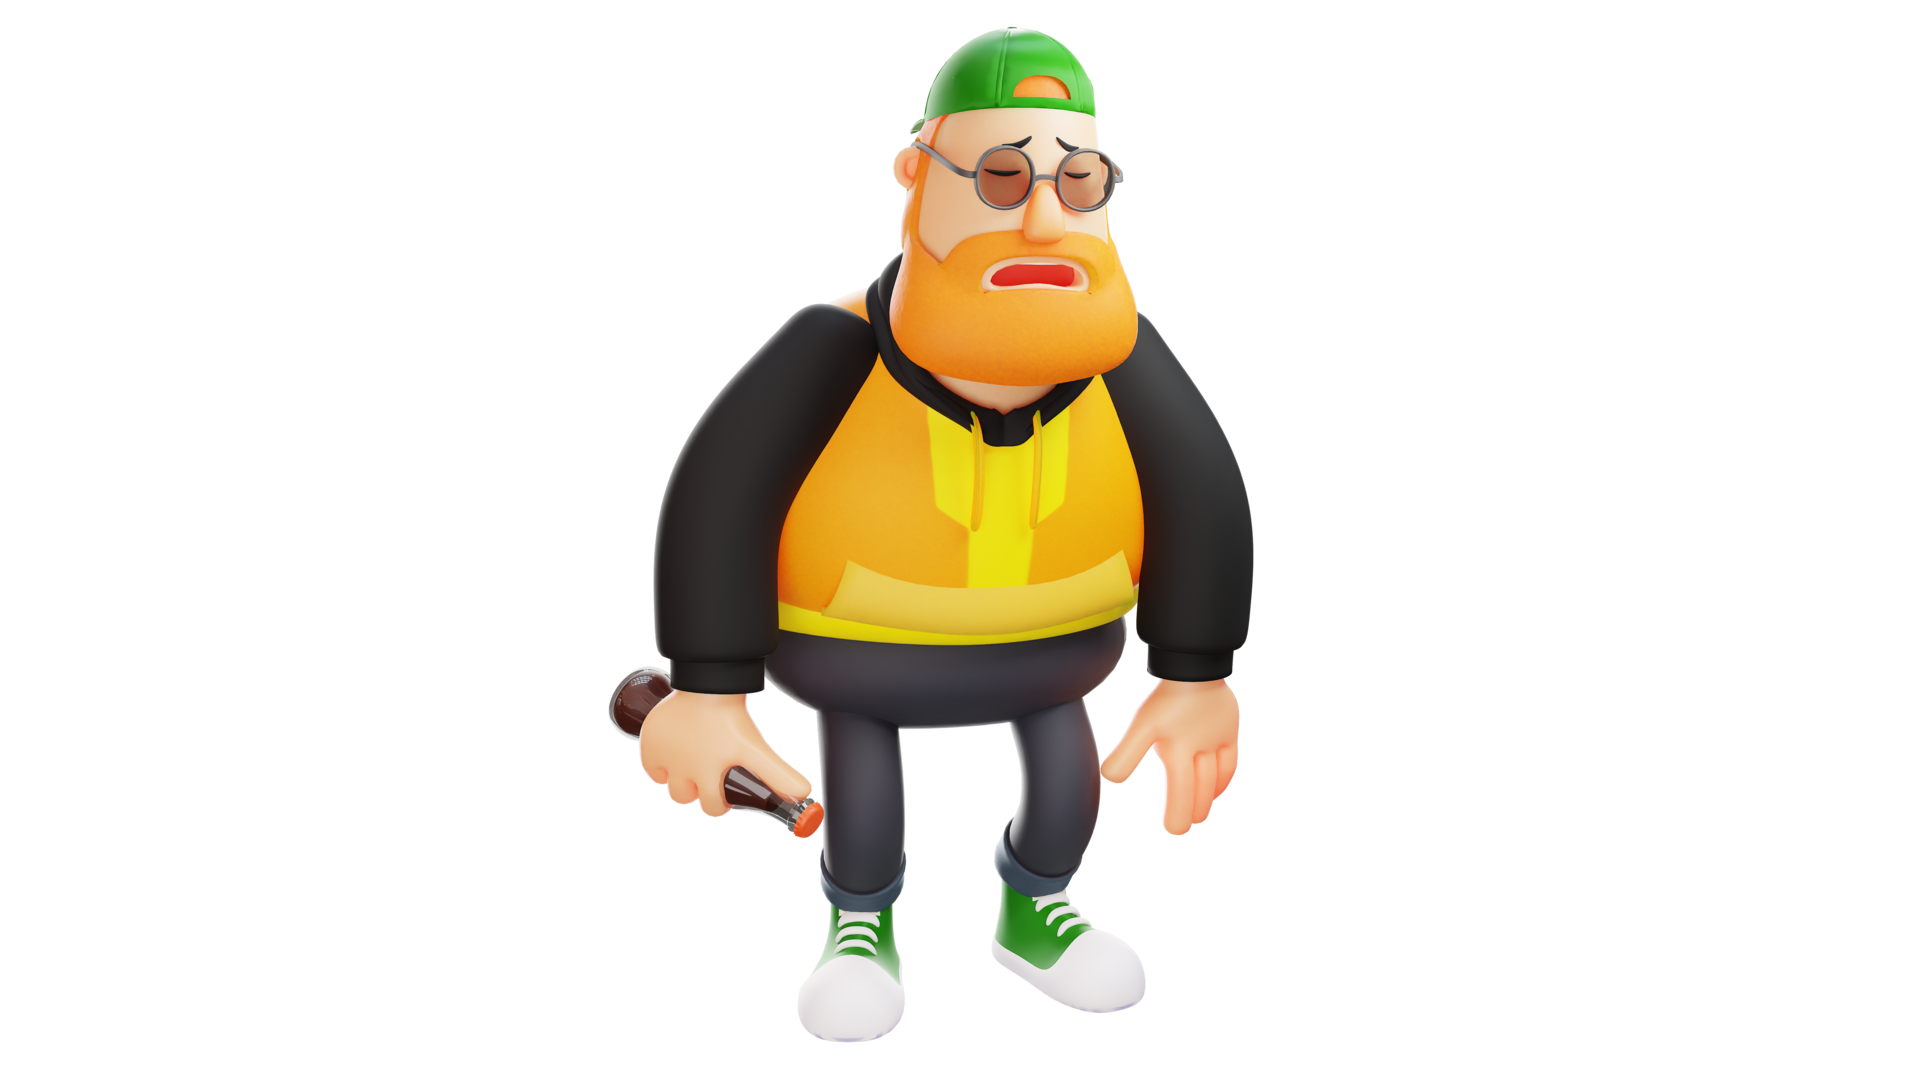 Free 3D illustration. Tired Fat Man 3D Cartoon Character. A stylized fat  man was standing with his eyes closed. Fat man sleepy and carrying a bottle  of soda. 3D Cartoon Character 18823749